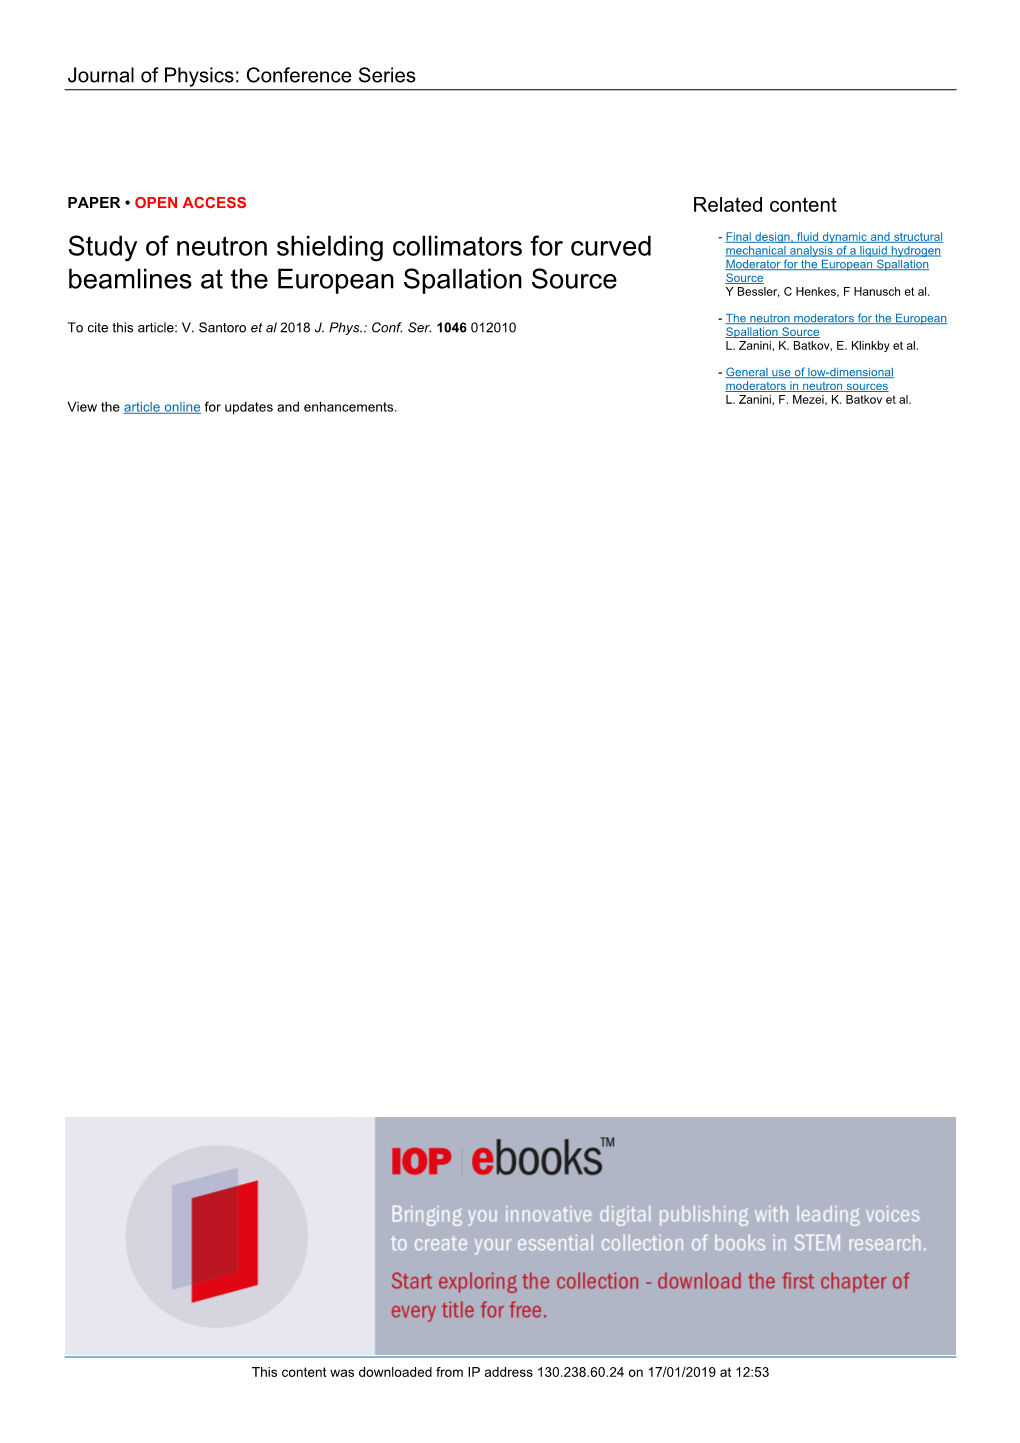 Study of Neutron Shielding Collimators for Curved Beamlines at the European Spallation Source